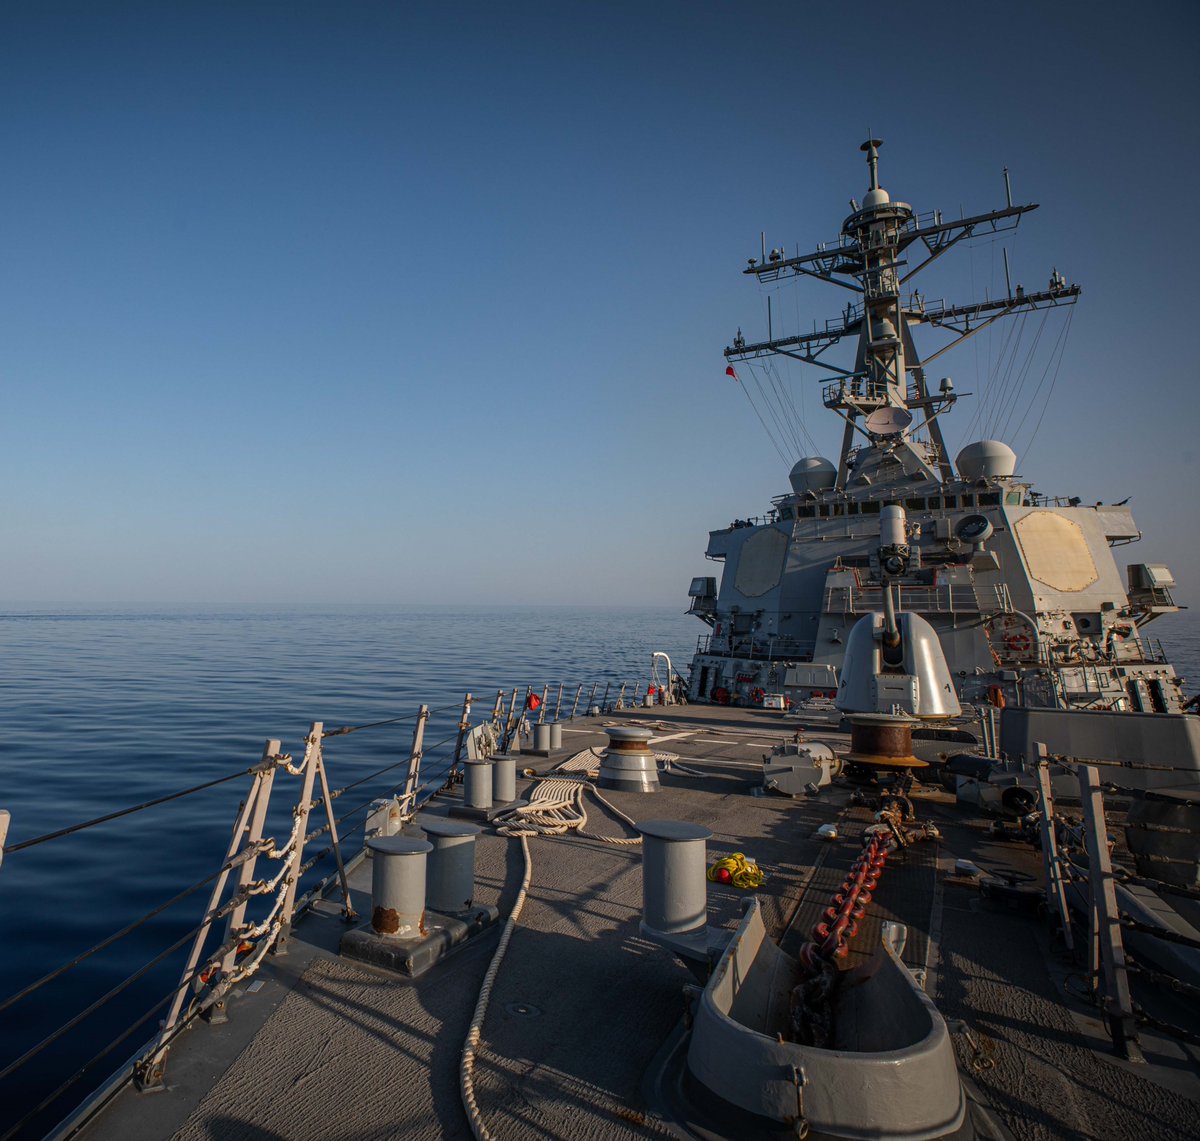 CENTCOM:In the early morning hours of December 16 (Sanna time) the US Arliegh Burke-class guided missile destroyer USS CARNEY (DDG 64), operating in the Red Sea, successfully engaged 14 unmanned aerial systems launched as a drone wave from Houthi-controlled areas of Yemen. The UAS were assessed to be one-way attack drones and were shot down with no damage to ships in the area or reported injuries. Regional Red Sea partners were alerted to the threat